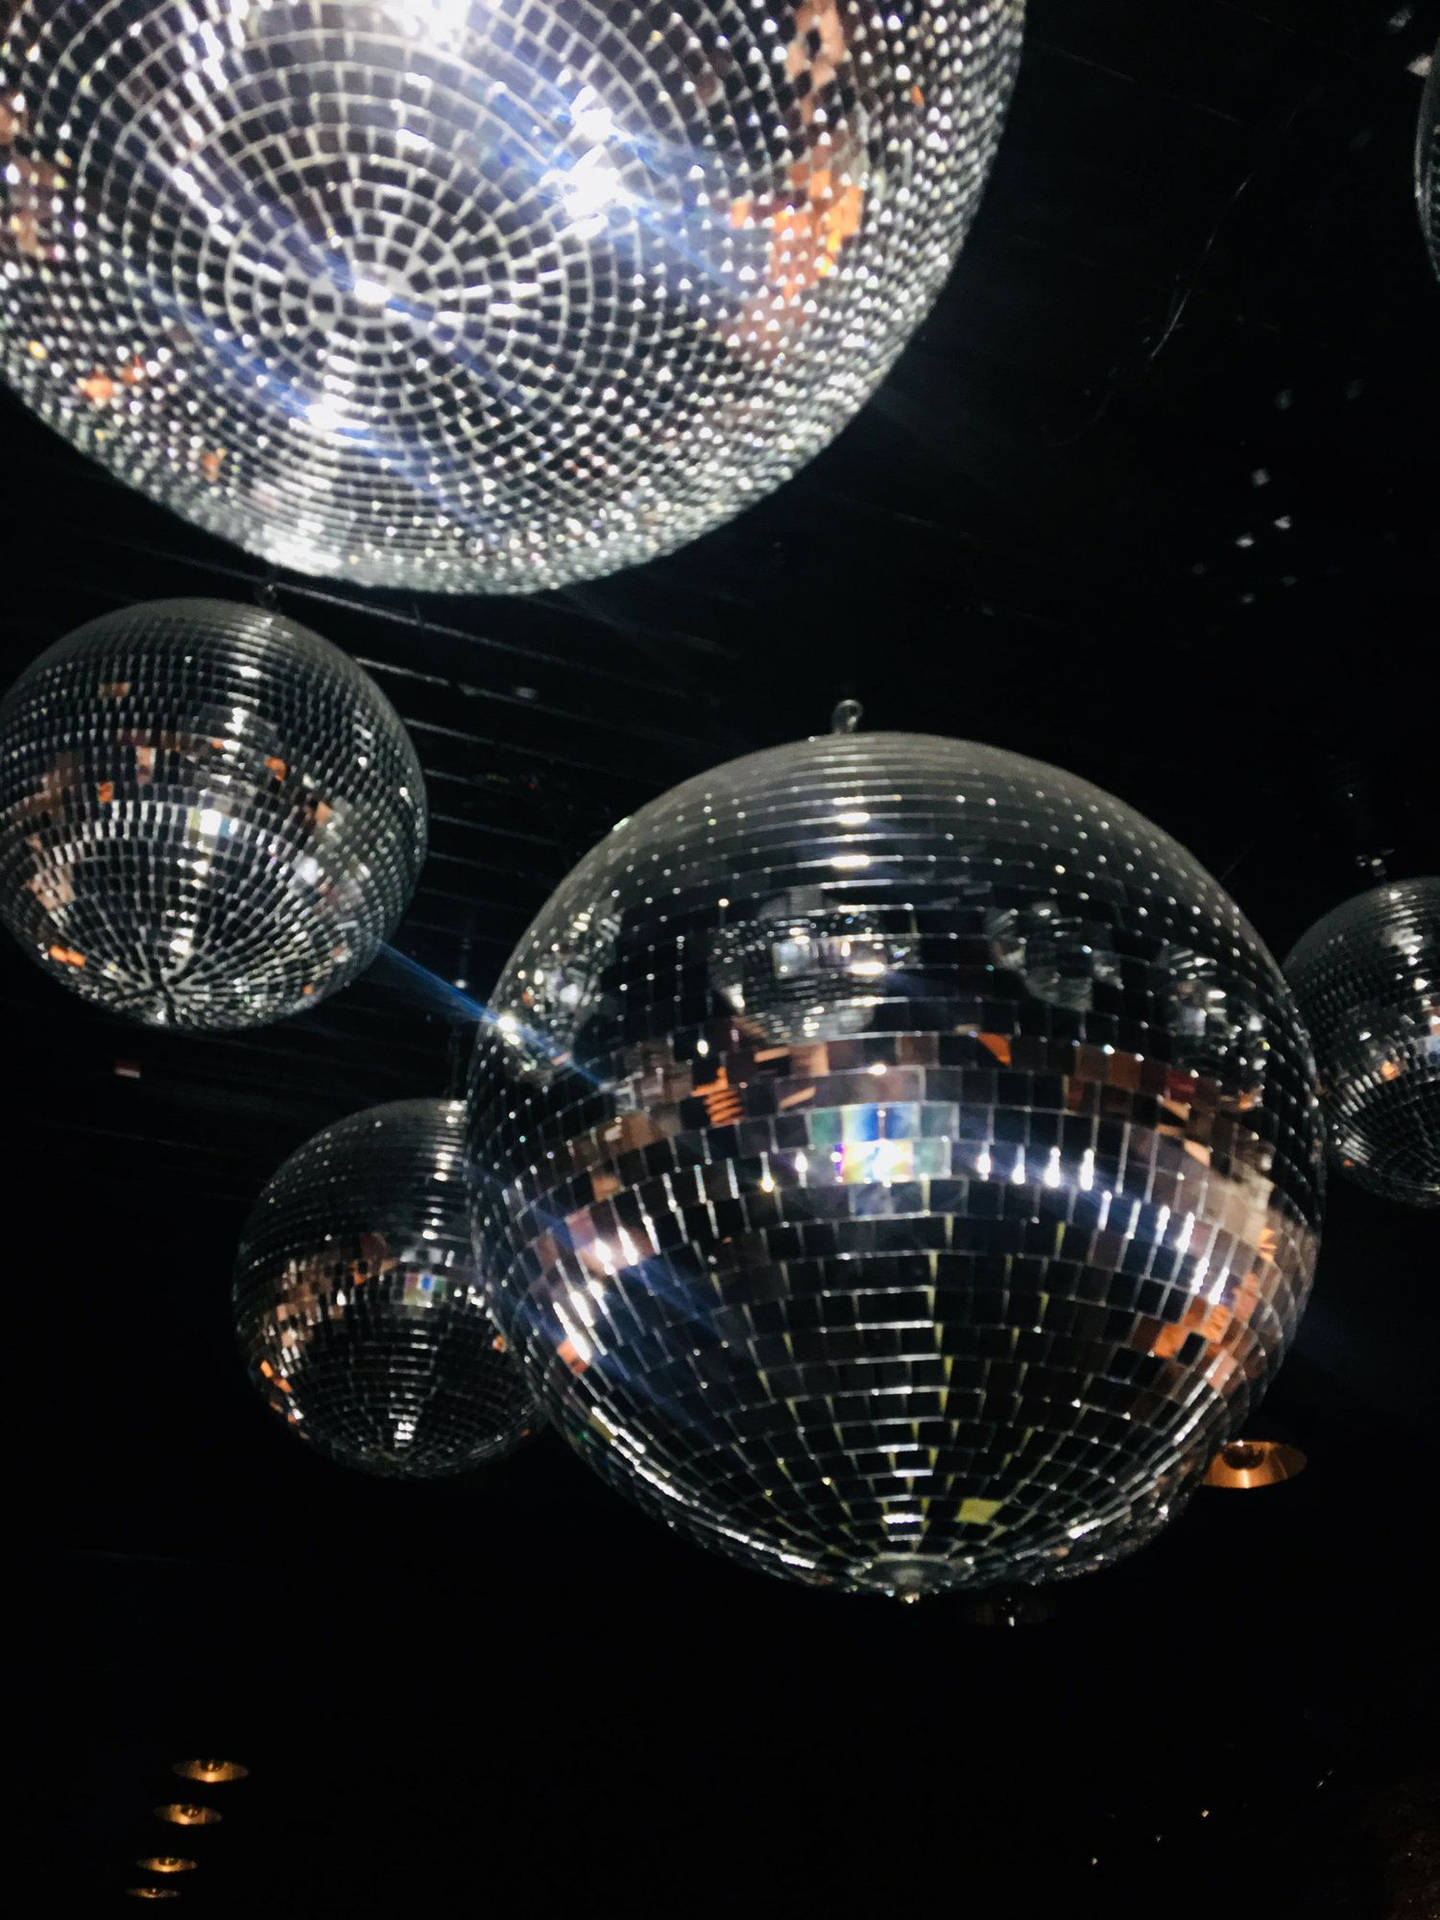 70s Disco Ball Aesthetic Picture